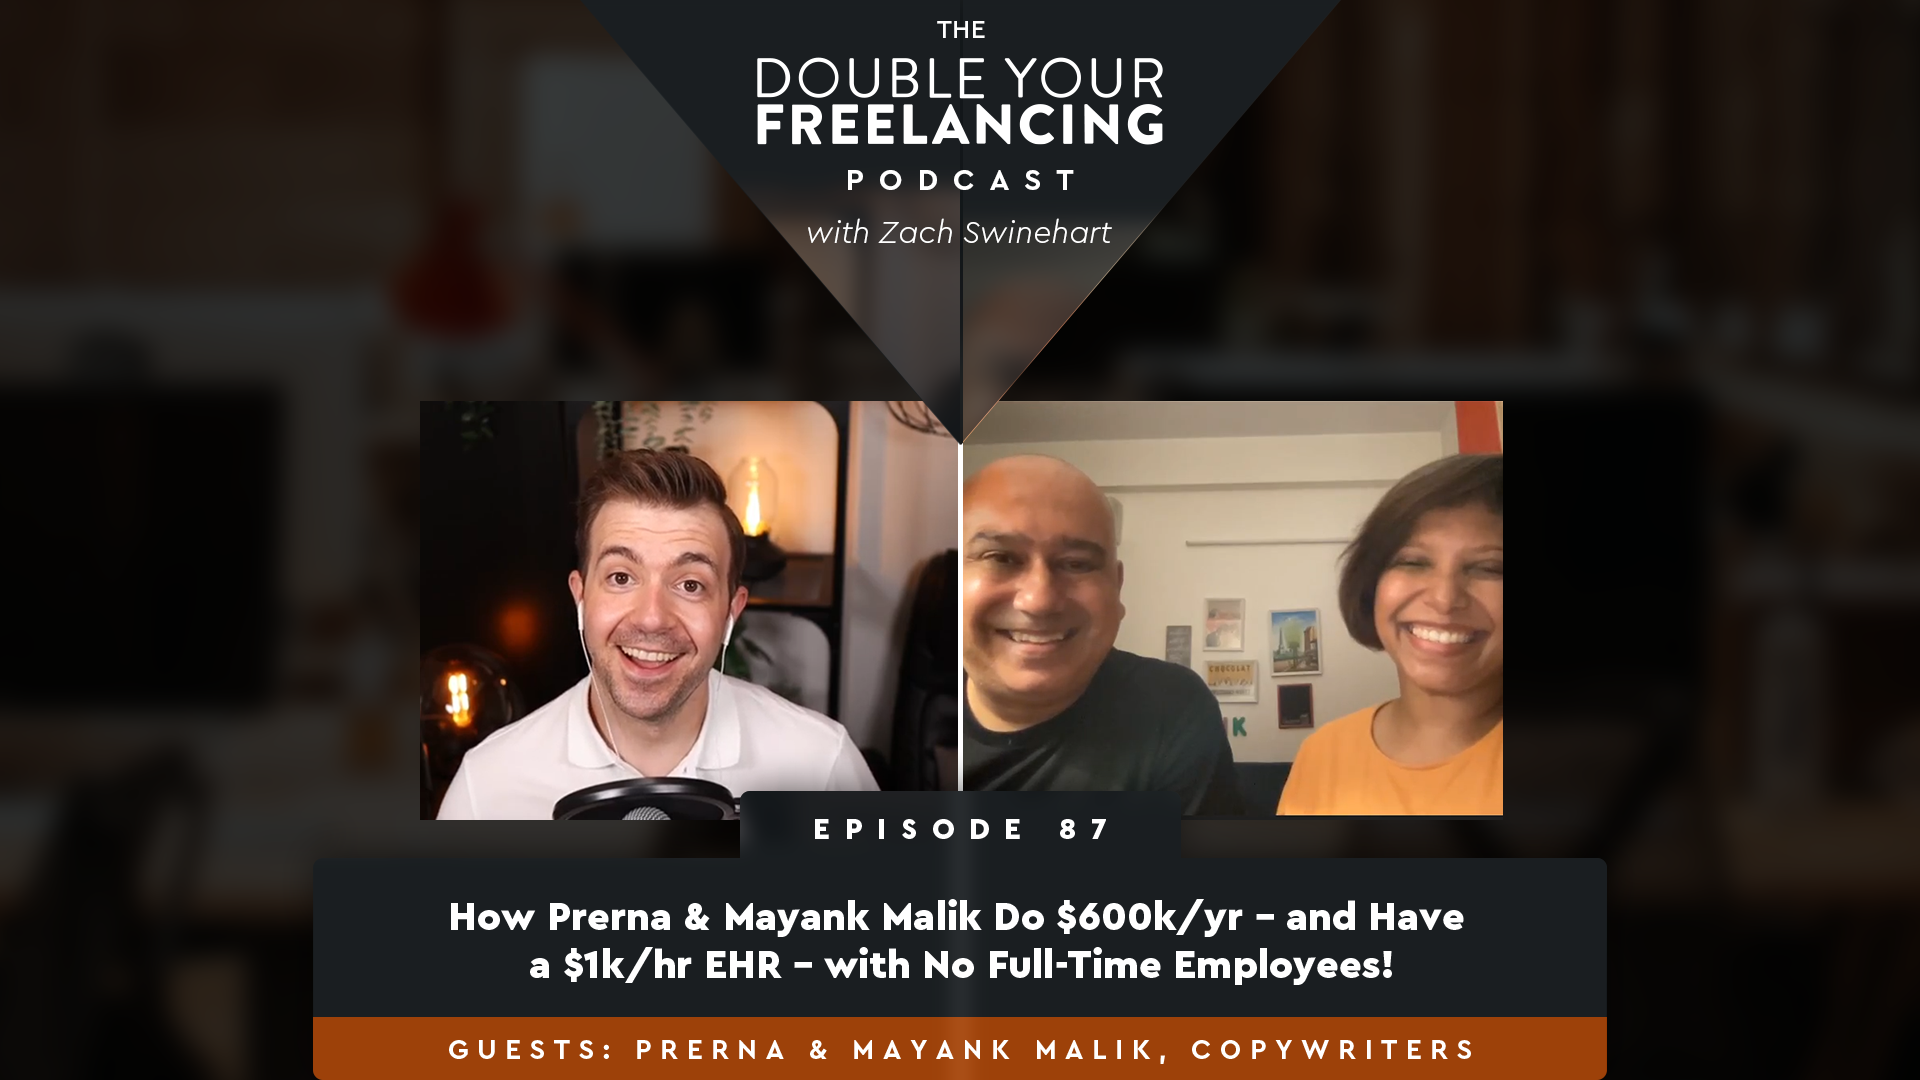 Episode 87: How Prerna & Mayank Malik Do $600k/yr – and Have a $1k/hr EHR – with No Full-Time Employees!